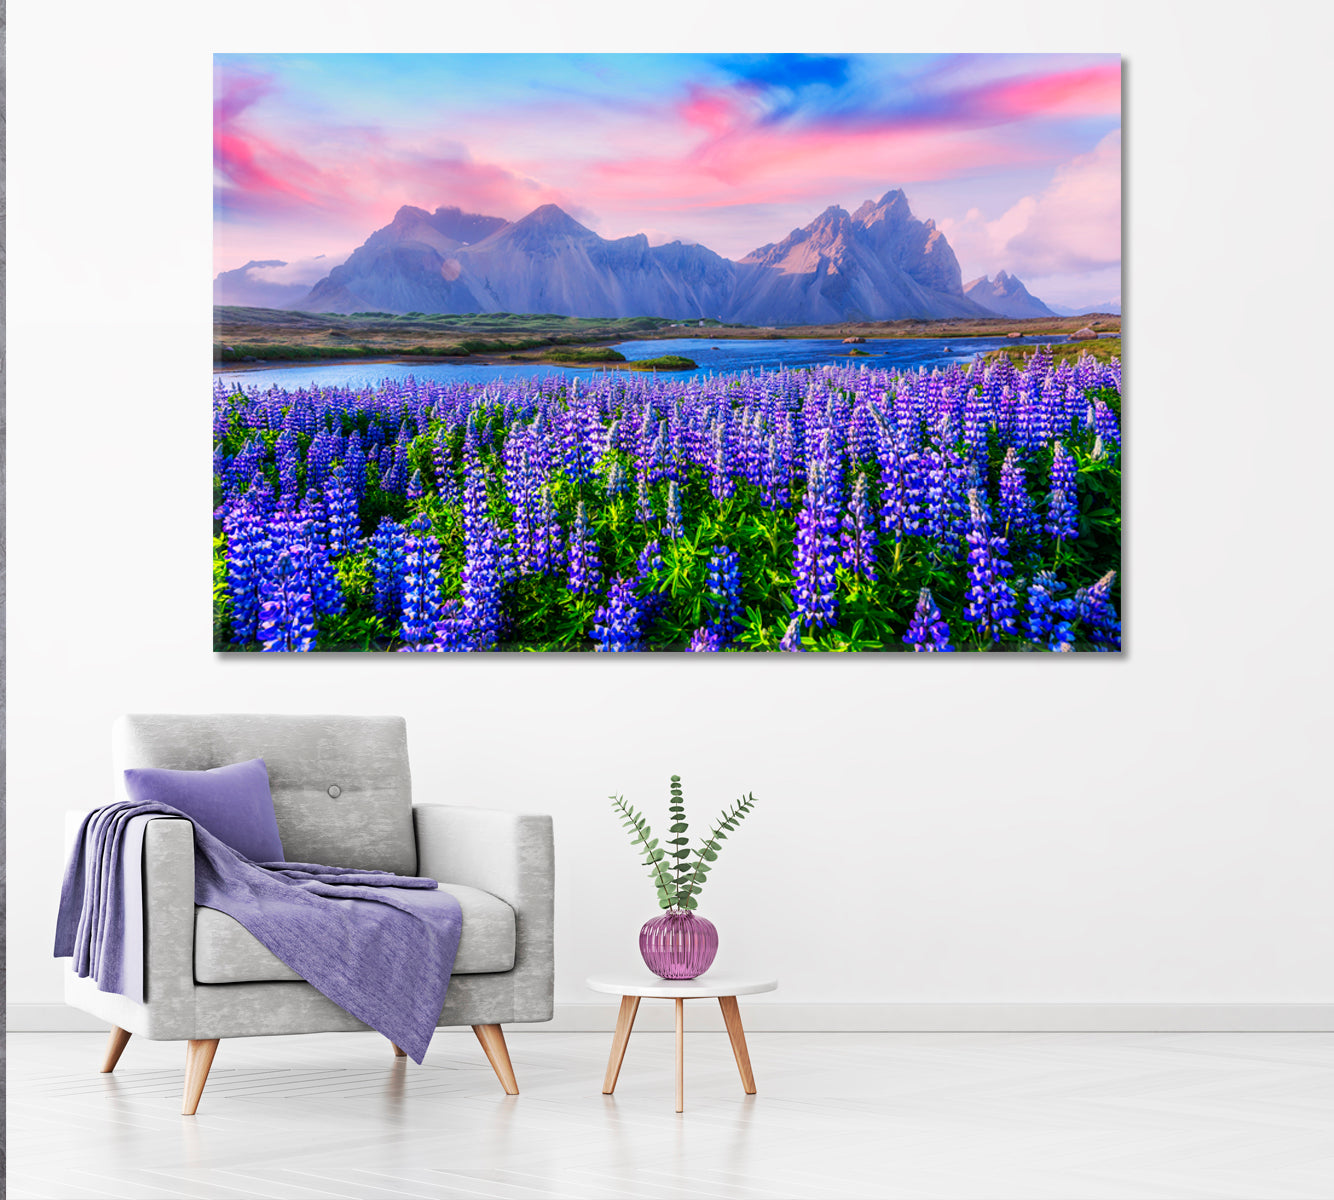 Famous Lupine Flowers near Stokksnes Mountains Iceland Canvas Print ArtLexy 1 Panel 24"x16" inches 